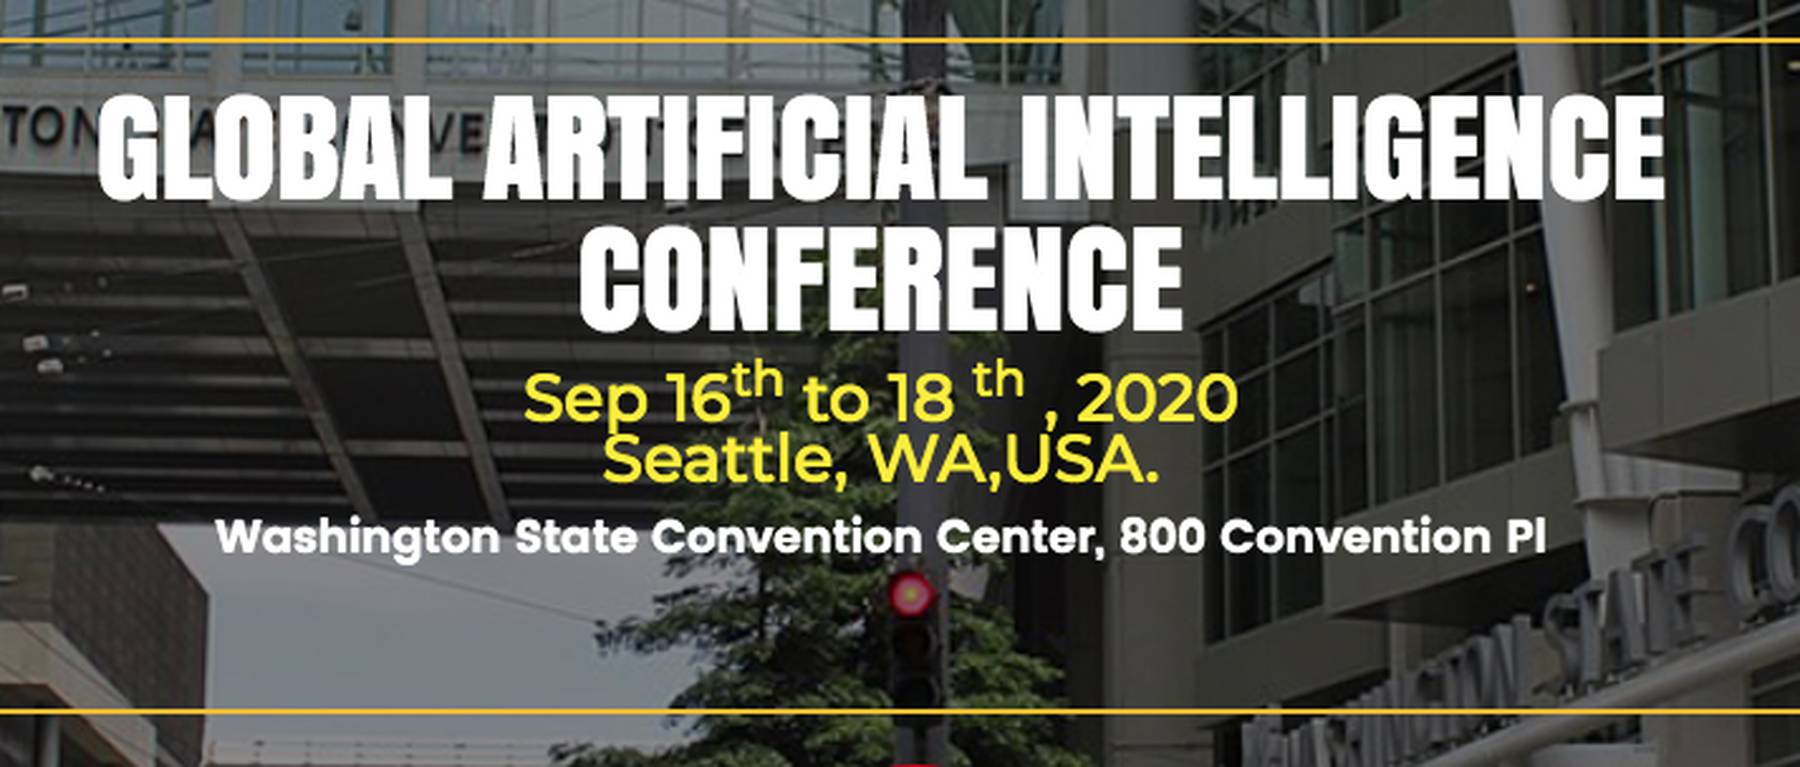 Global Artificial Intelligence Conference Seattle 2020